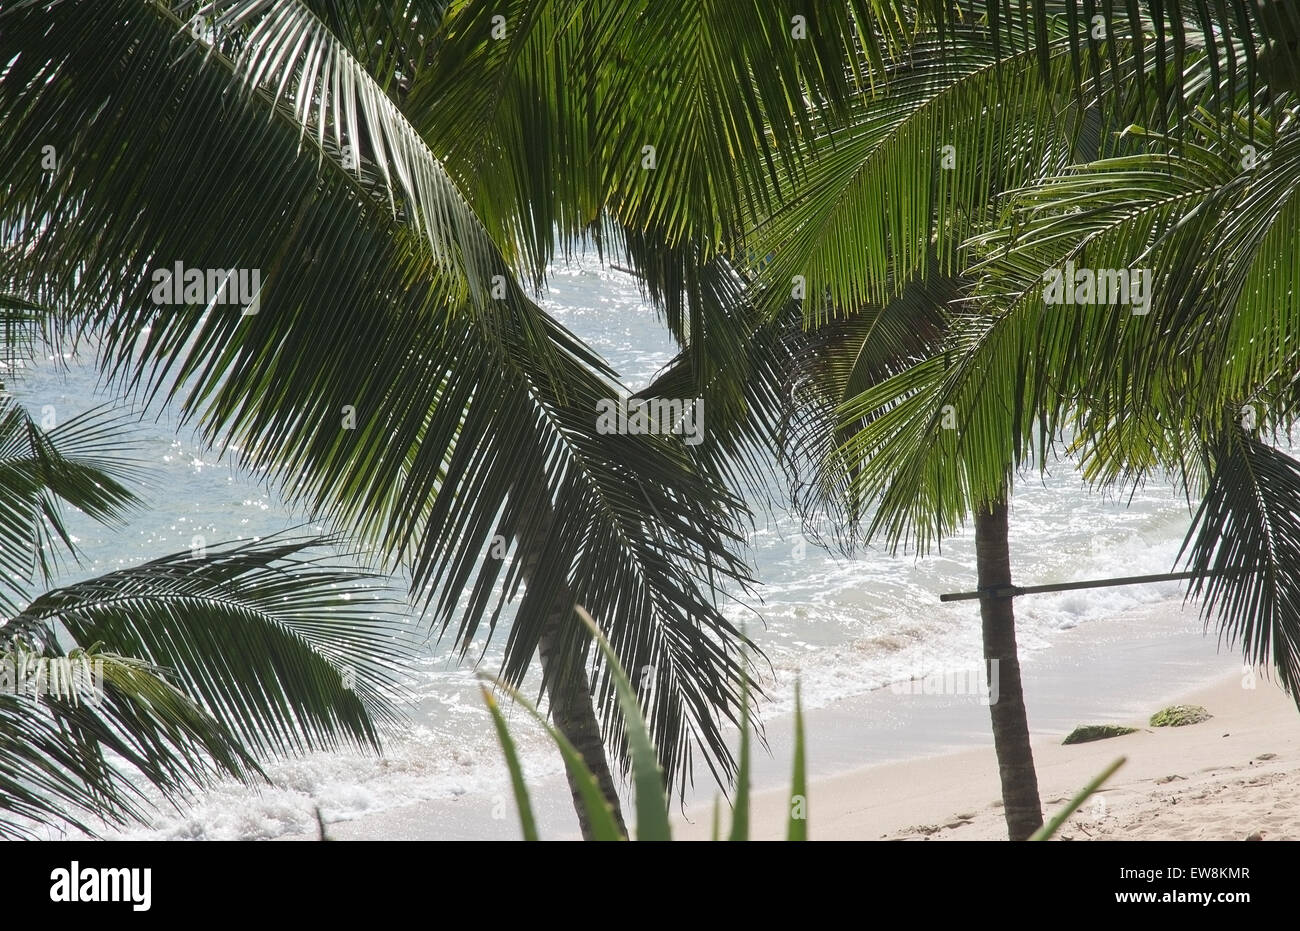 Coconut palm trees and and sandy beach below in remote location, Southern Province, Sri Lanka, Asia. Stock Photo